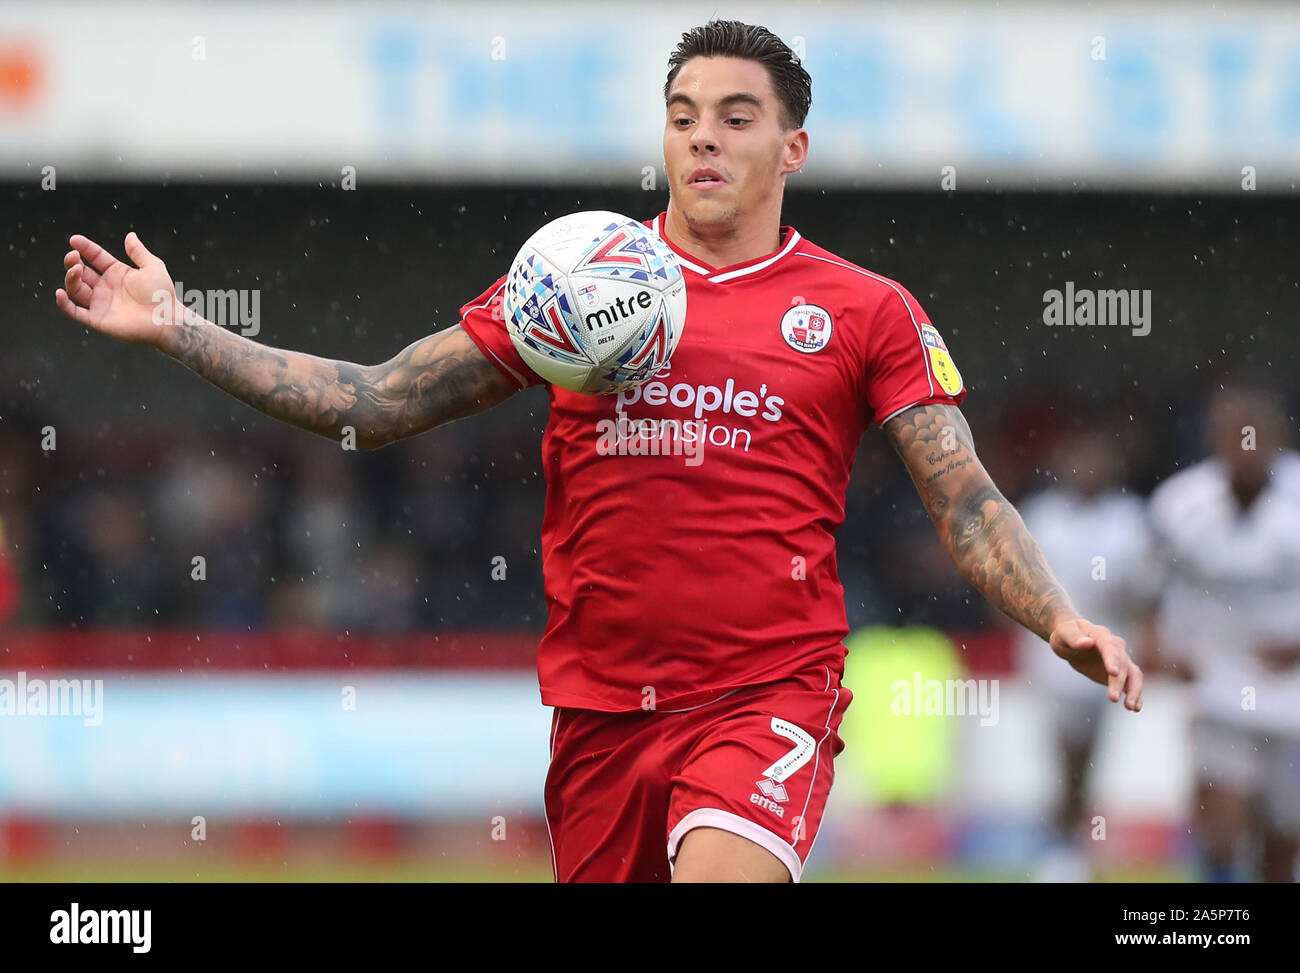 Crawley, UK. 12 October 2019 Crawley Town's Reece Grego-Cox in action during the Sky Bet League Two match between Crawley Town and Colchester United at the Peoples Pension Stadium in Crawley. Credit: Telephoto Images / Alamy Live News Stock Photo